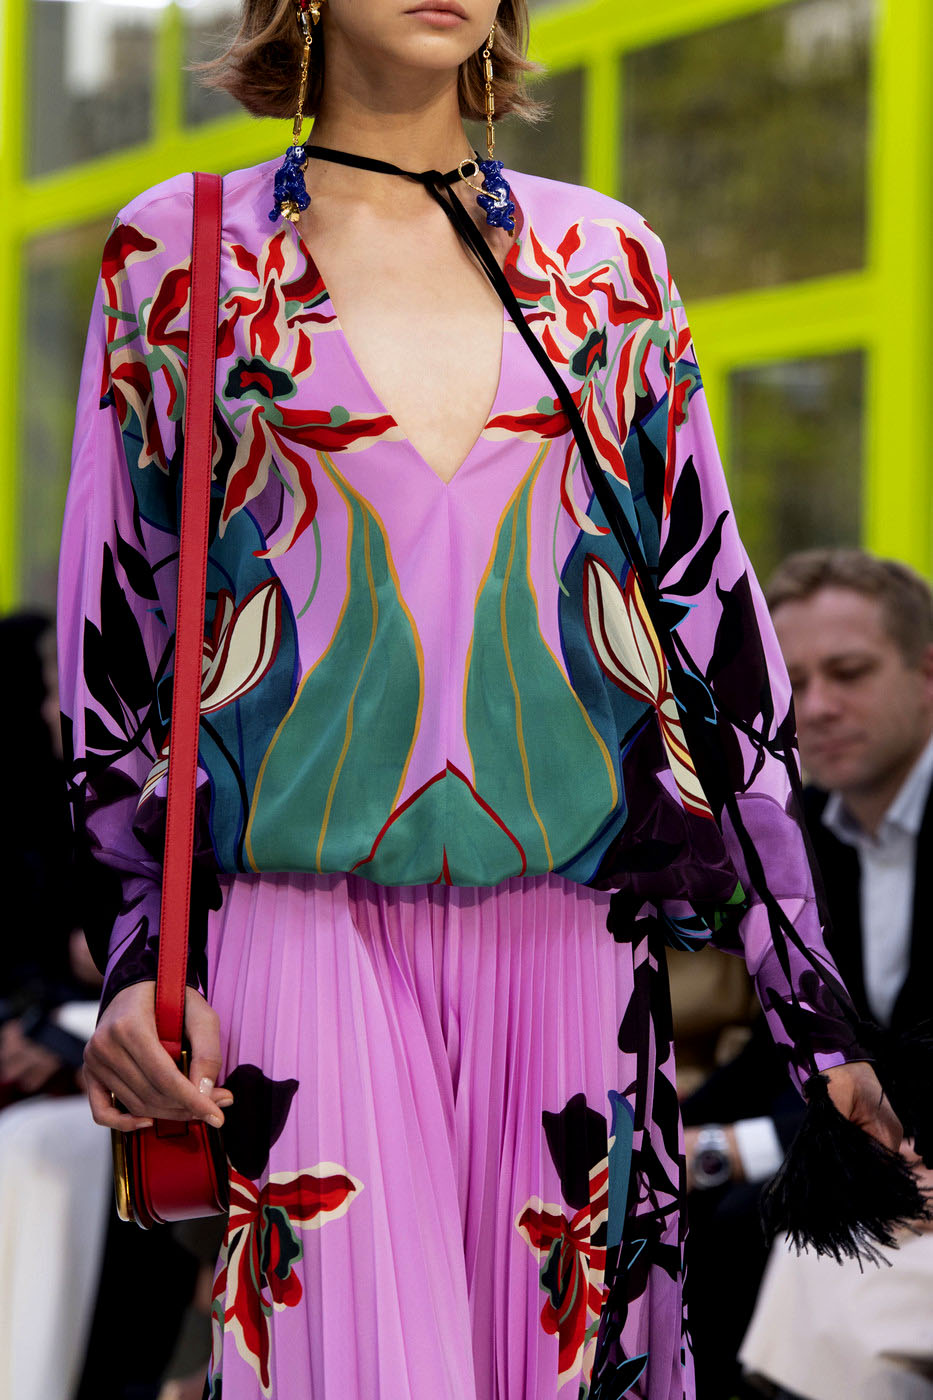 Close up: Valentino SPRING 2020 READY-TO-WEAR